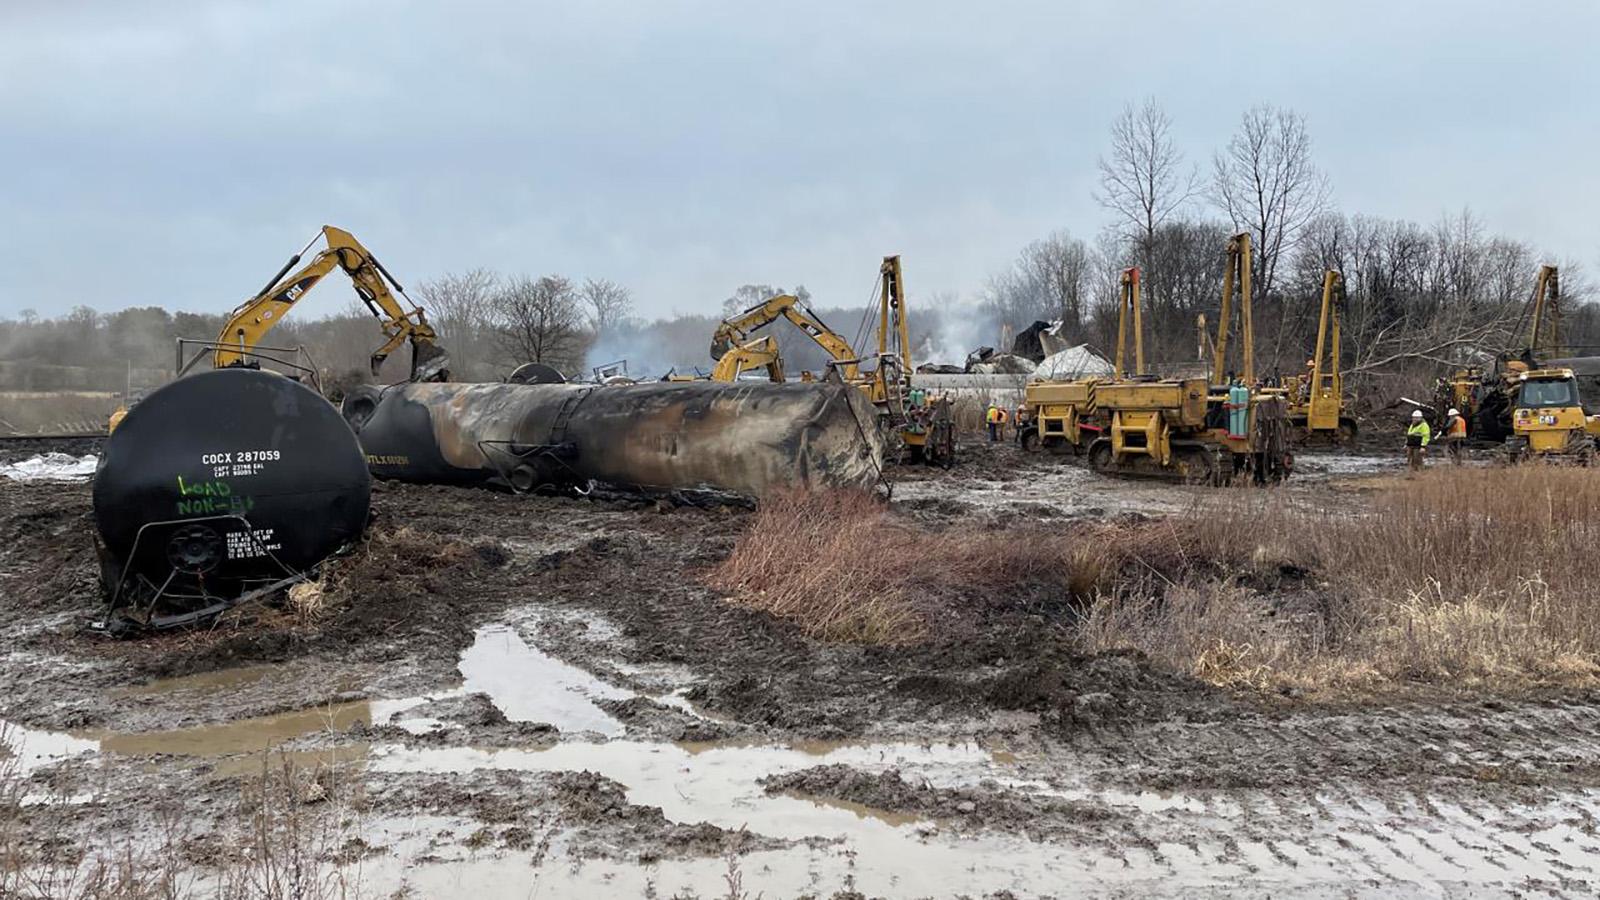 Norfolk Southern contractors remove a burned tank car from the crash site in East Palestine, Ohio. (Environmental Protection Agency)